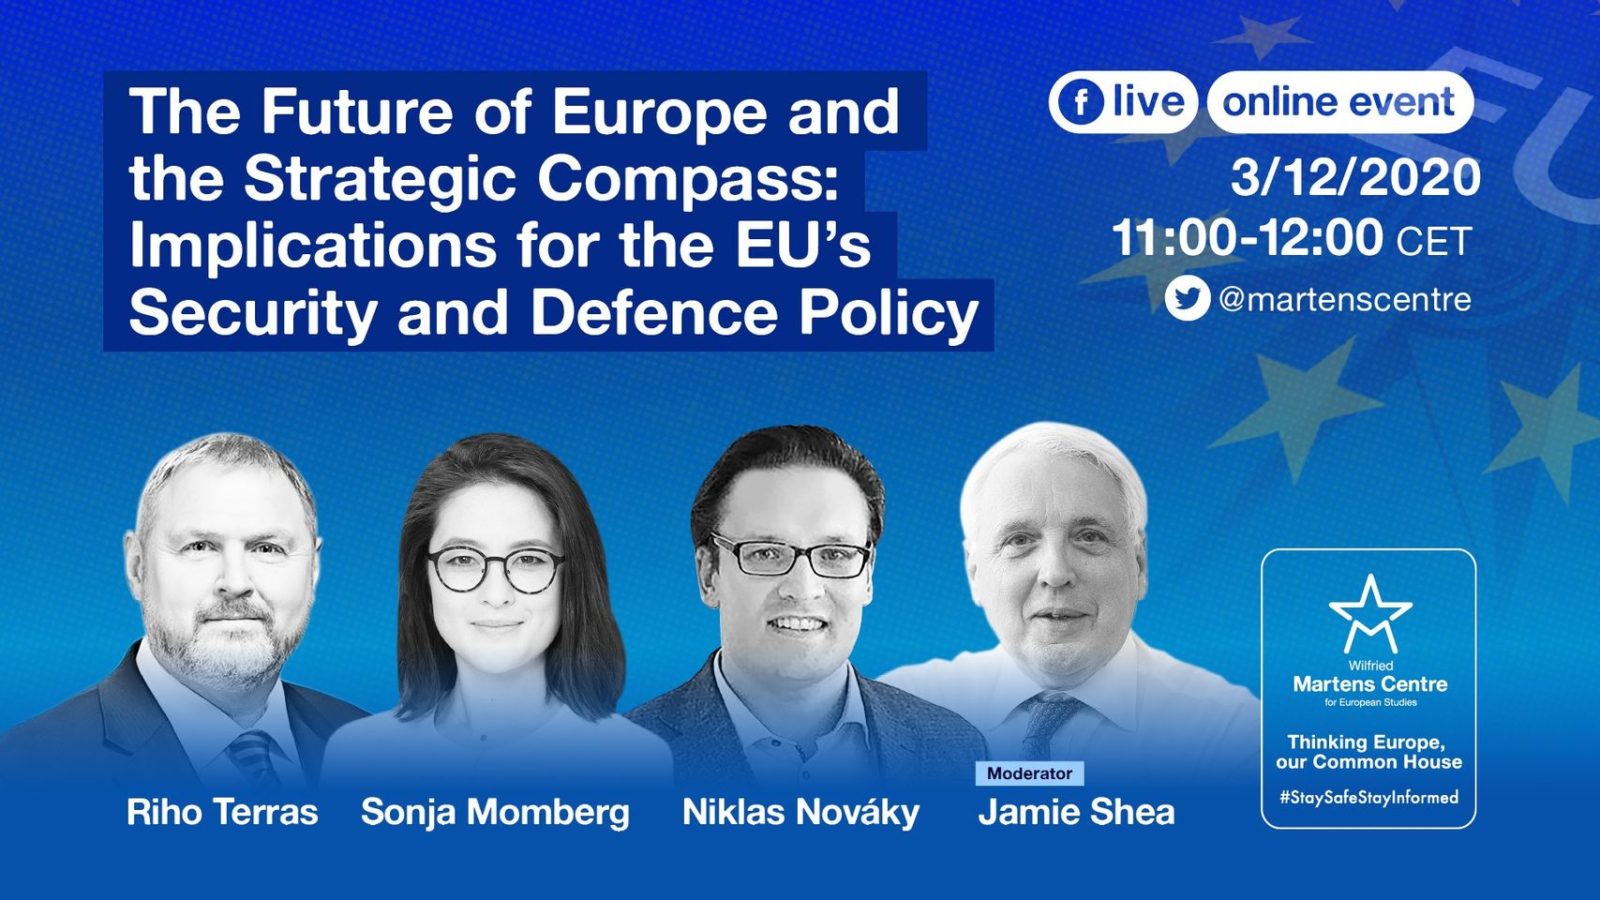 The Future of Europe & the Strategic Compass: Implications for the EU’s Security and Defence Policy